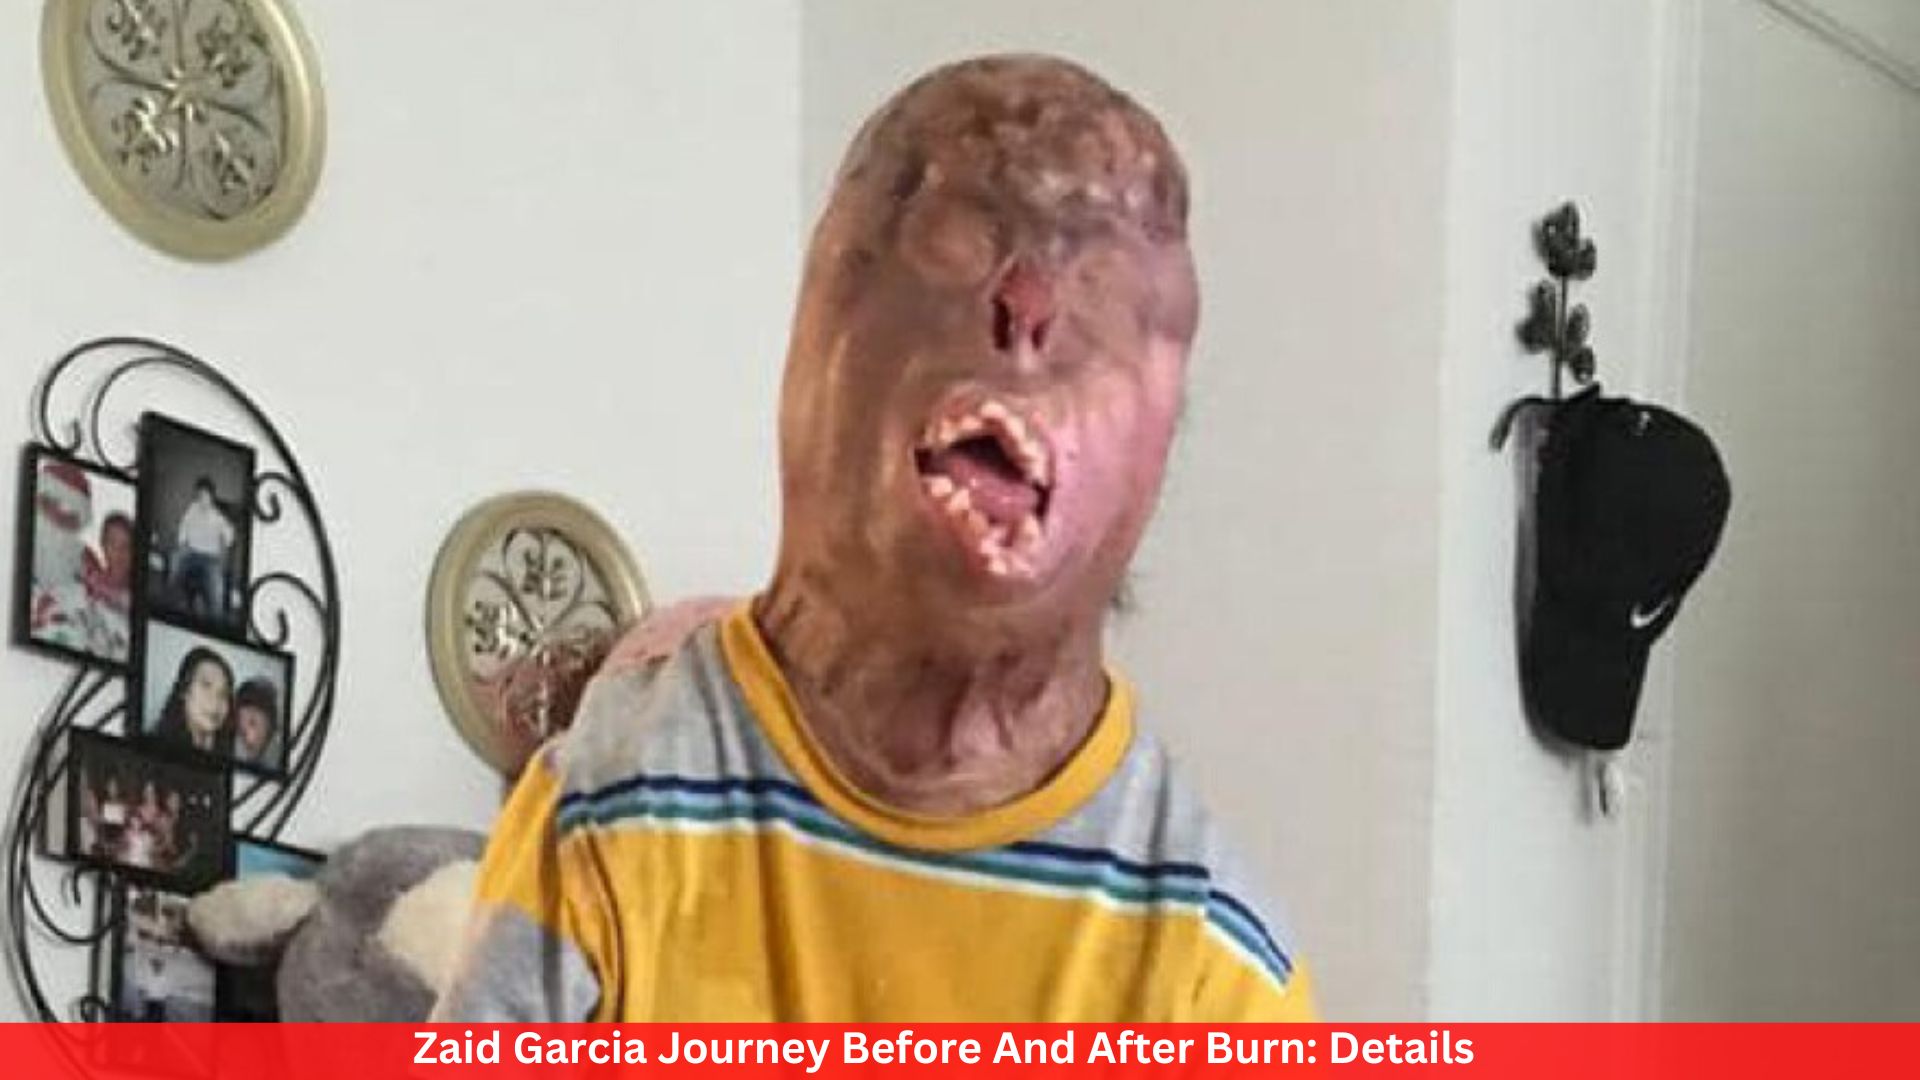 Zaid Garcia Journey Before And After Burn: Details